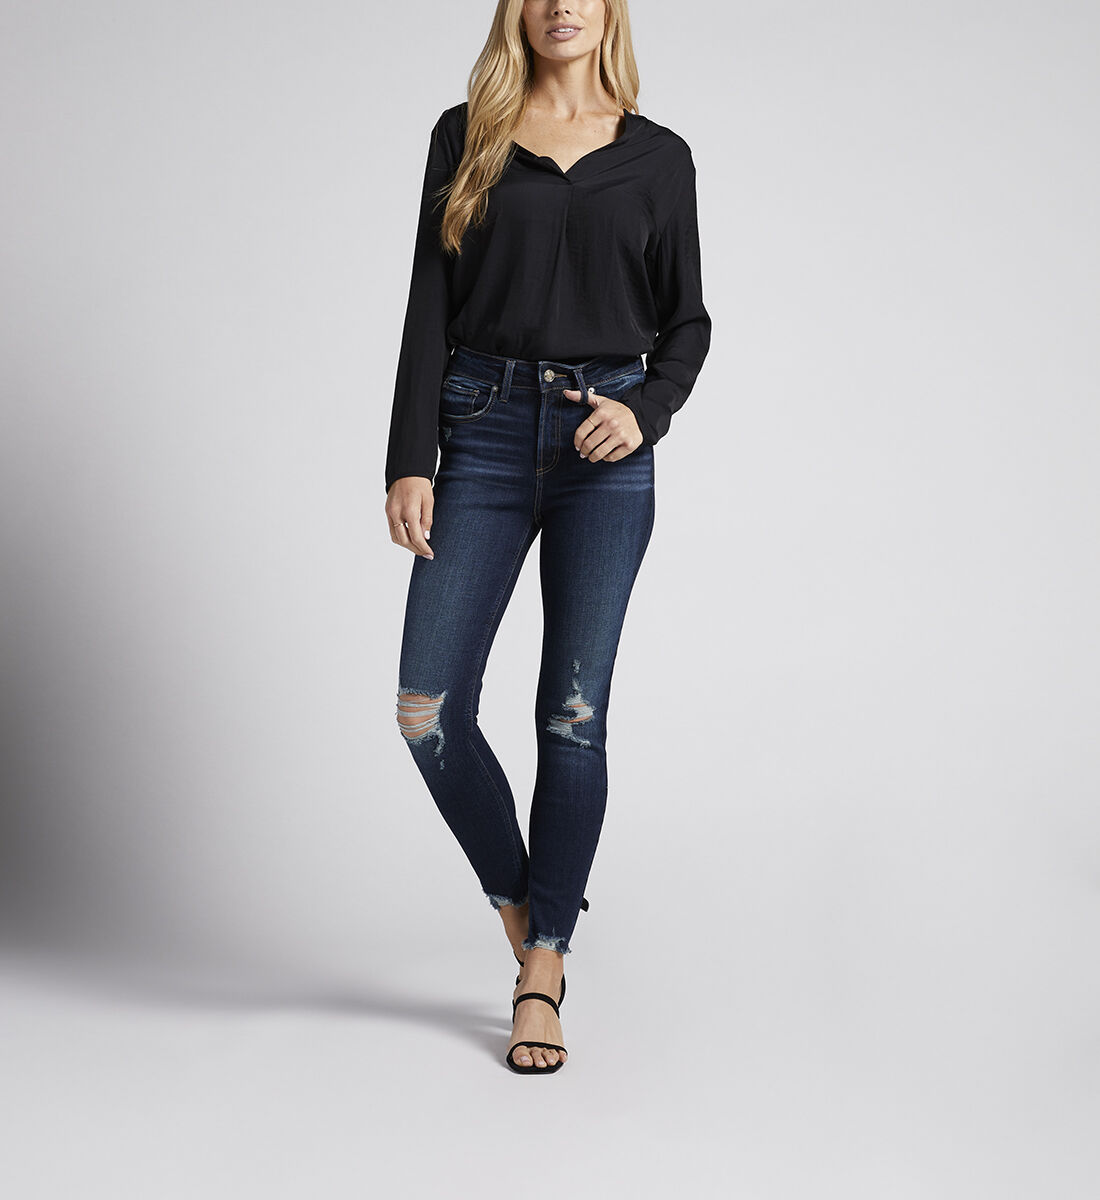 Women's Ripped and Torn Jeans